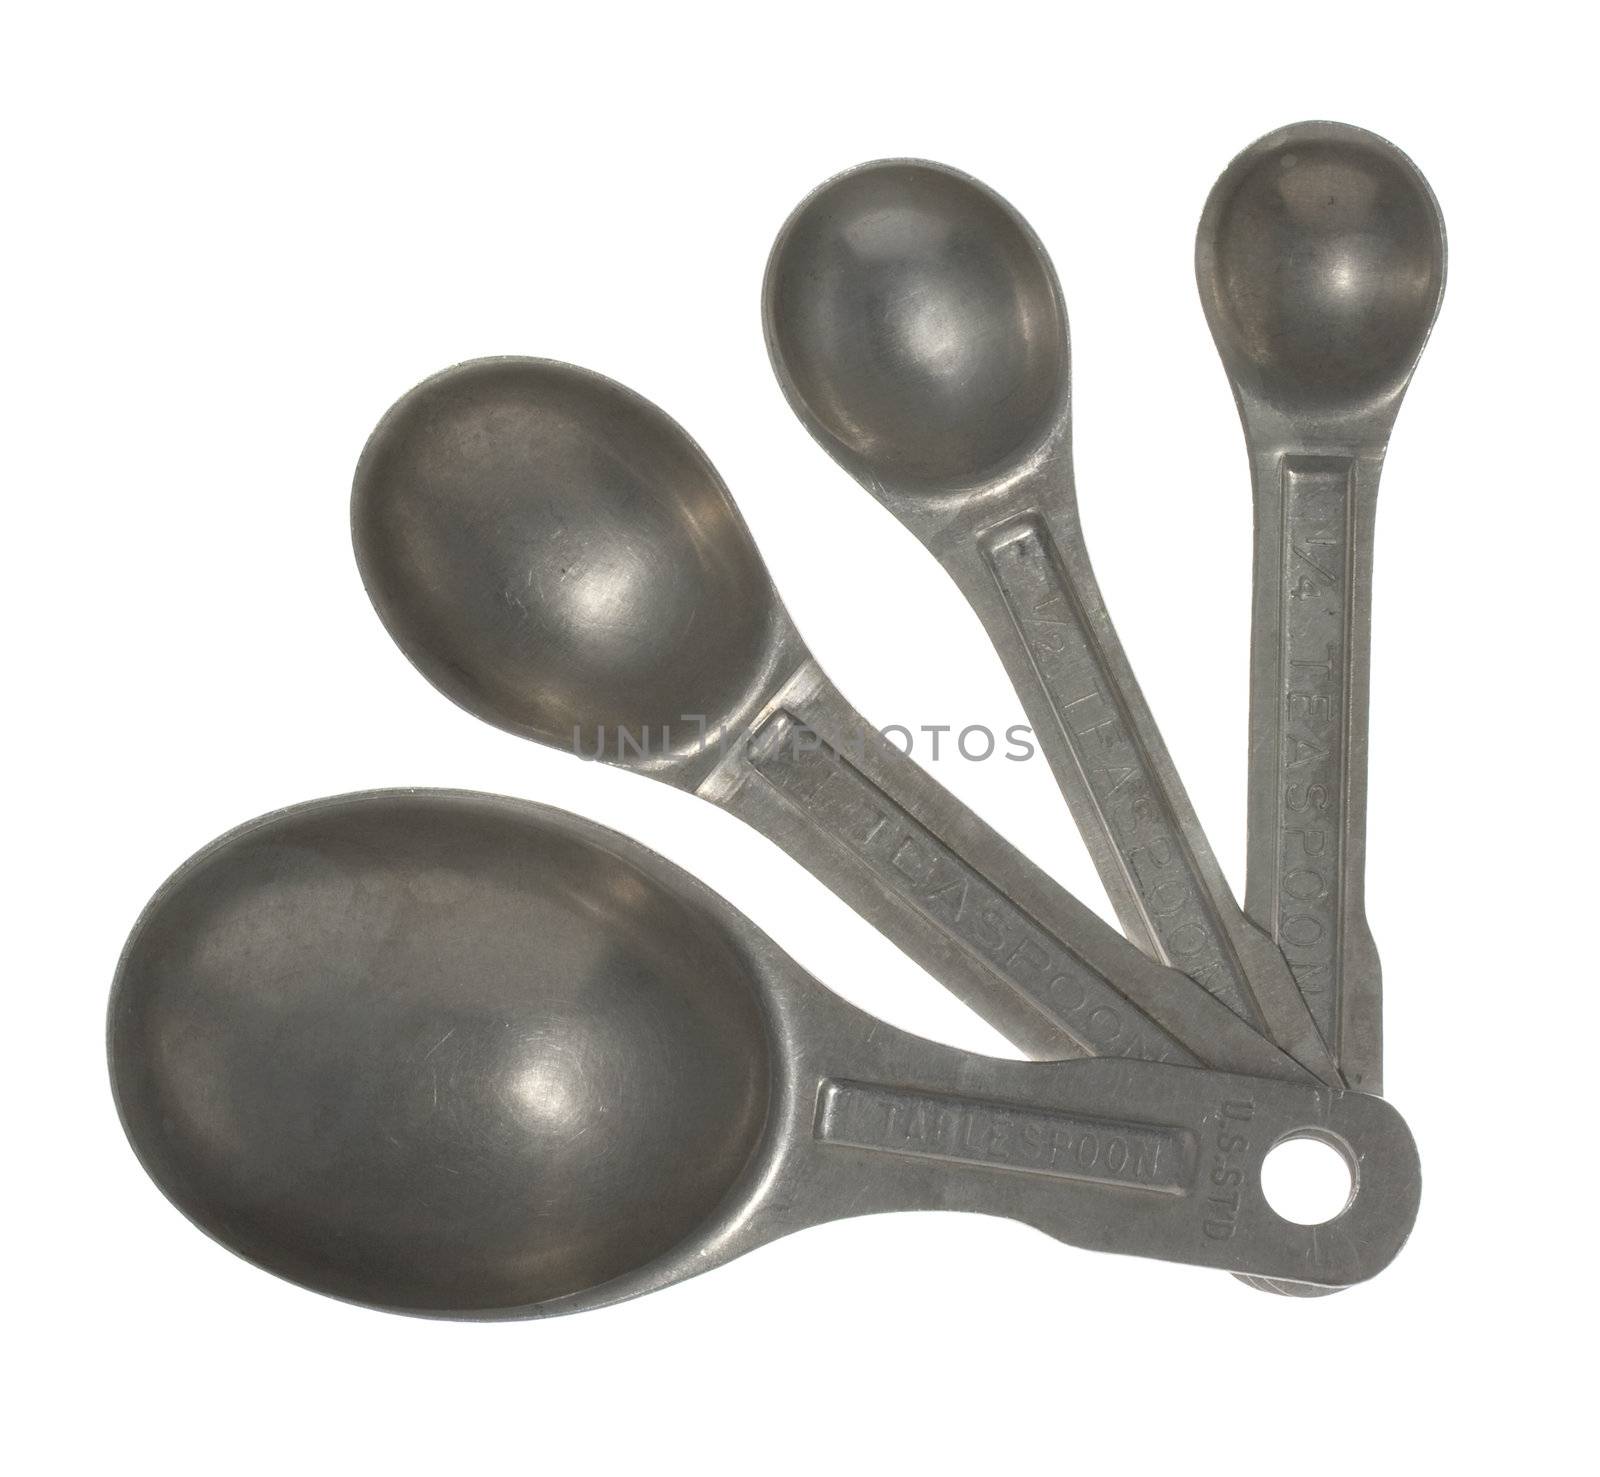 A set of four old, scratched aluminum measuring spoons isolated on white